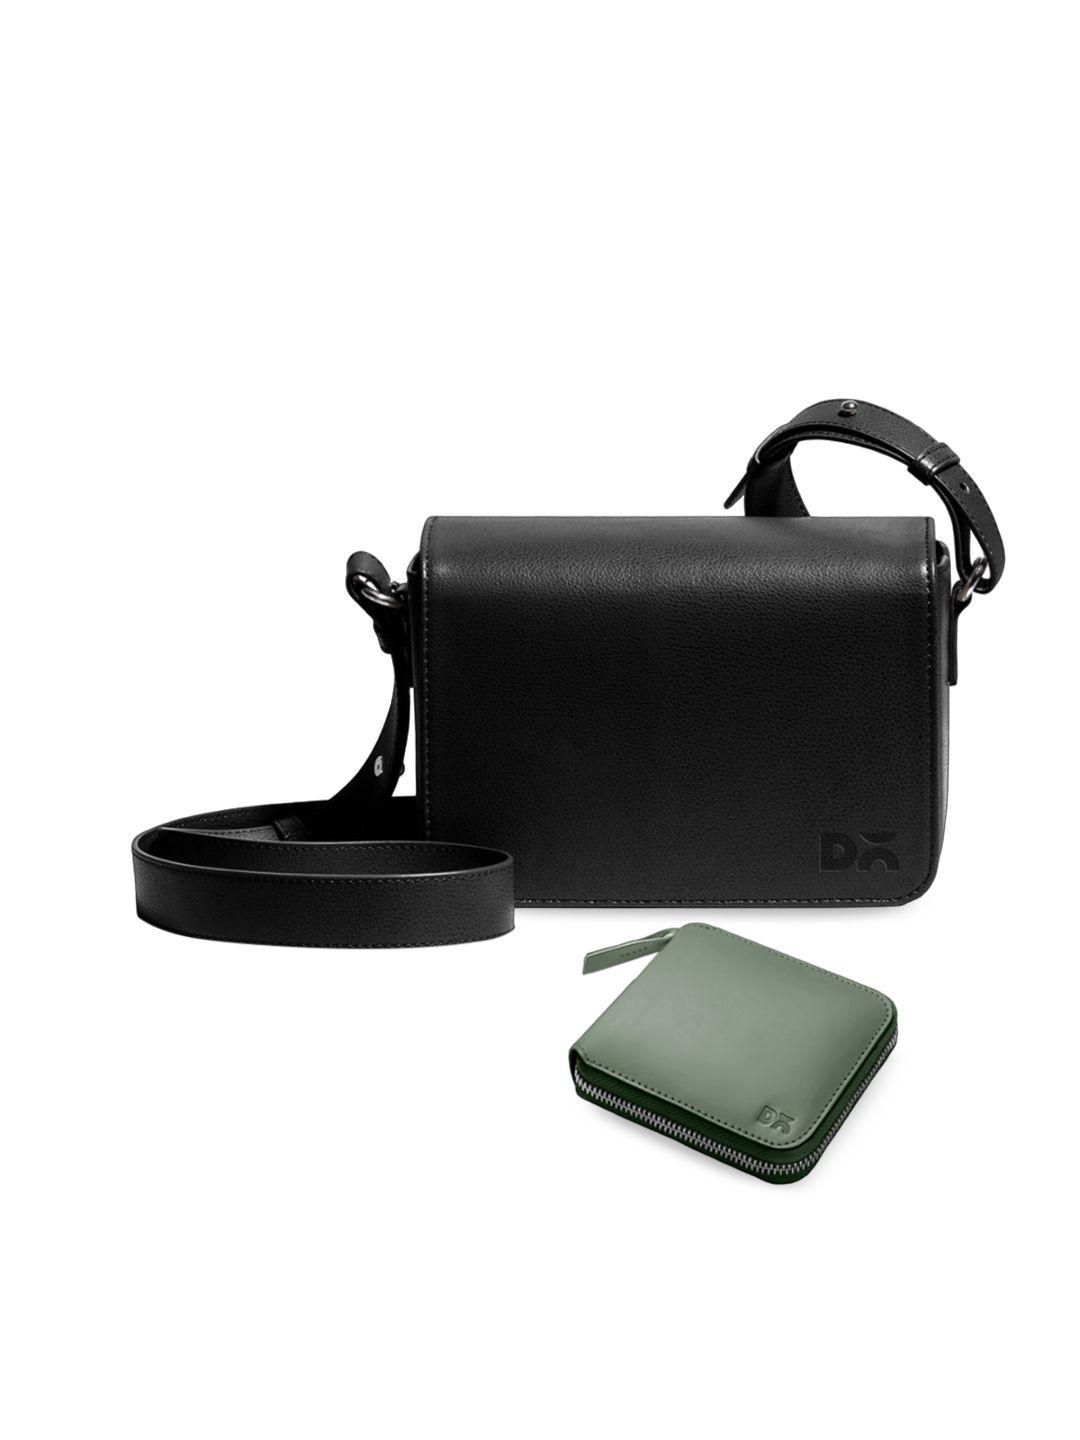 dailyobjects leather structured sling bag with zip wallet